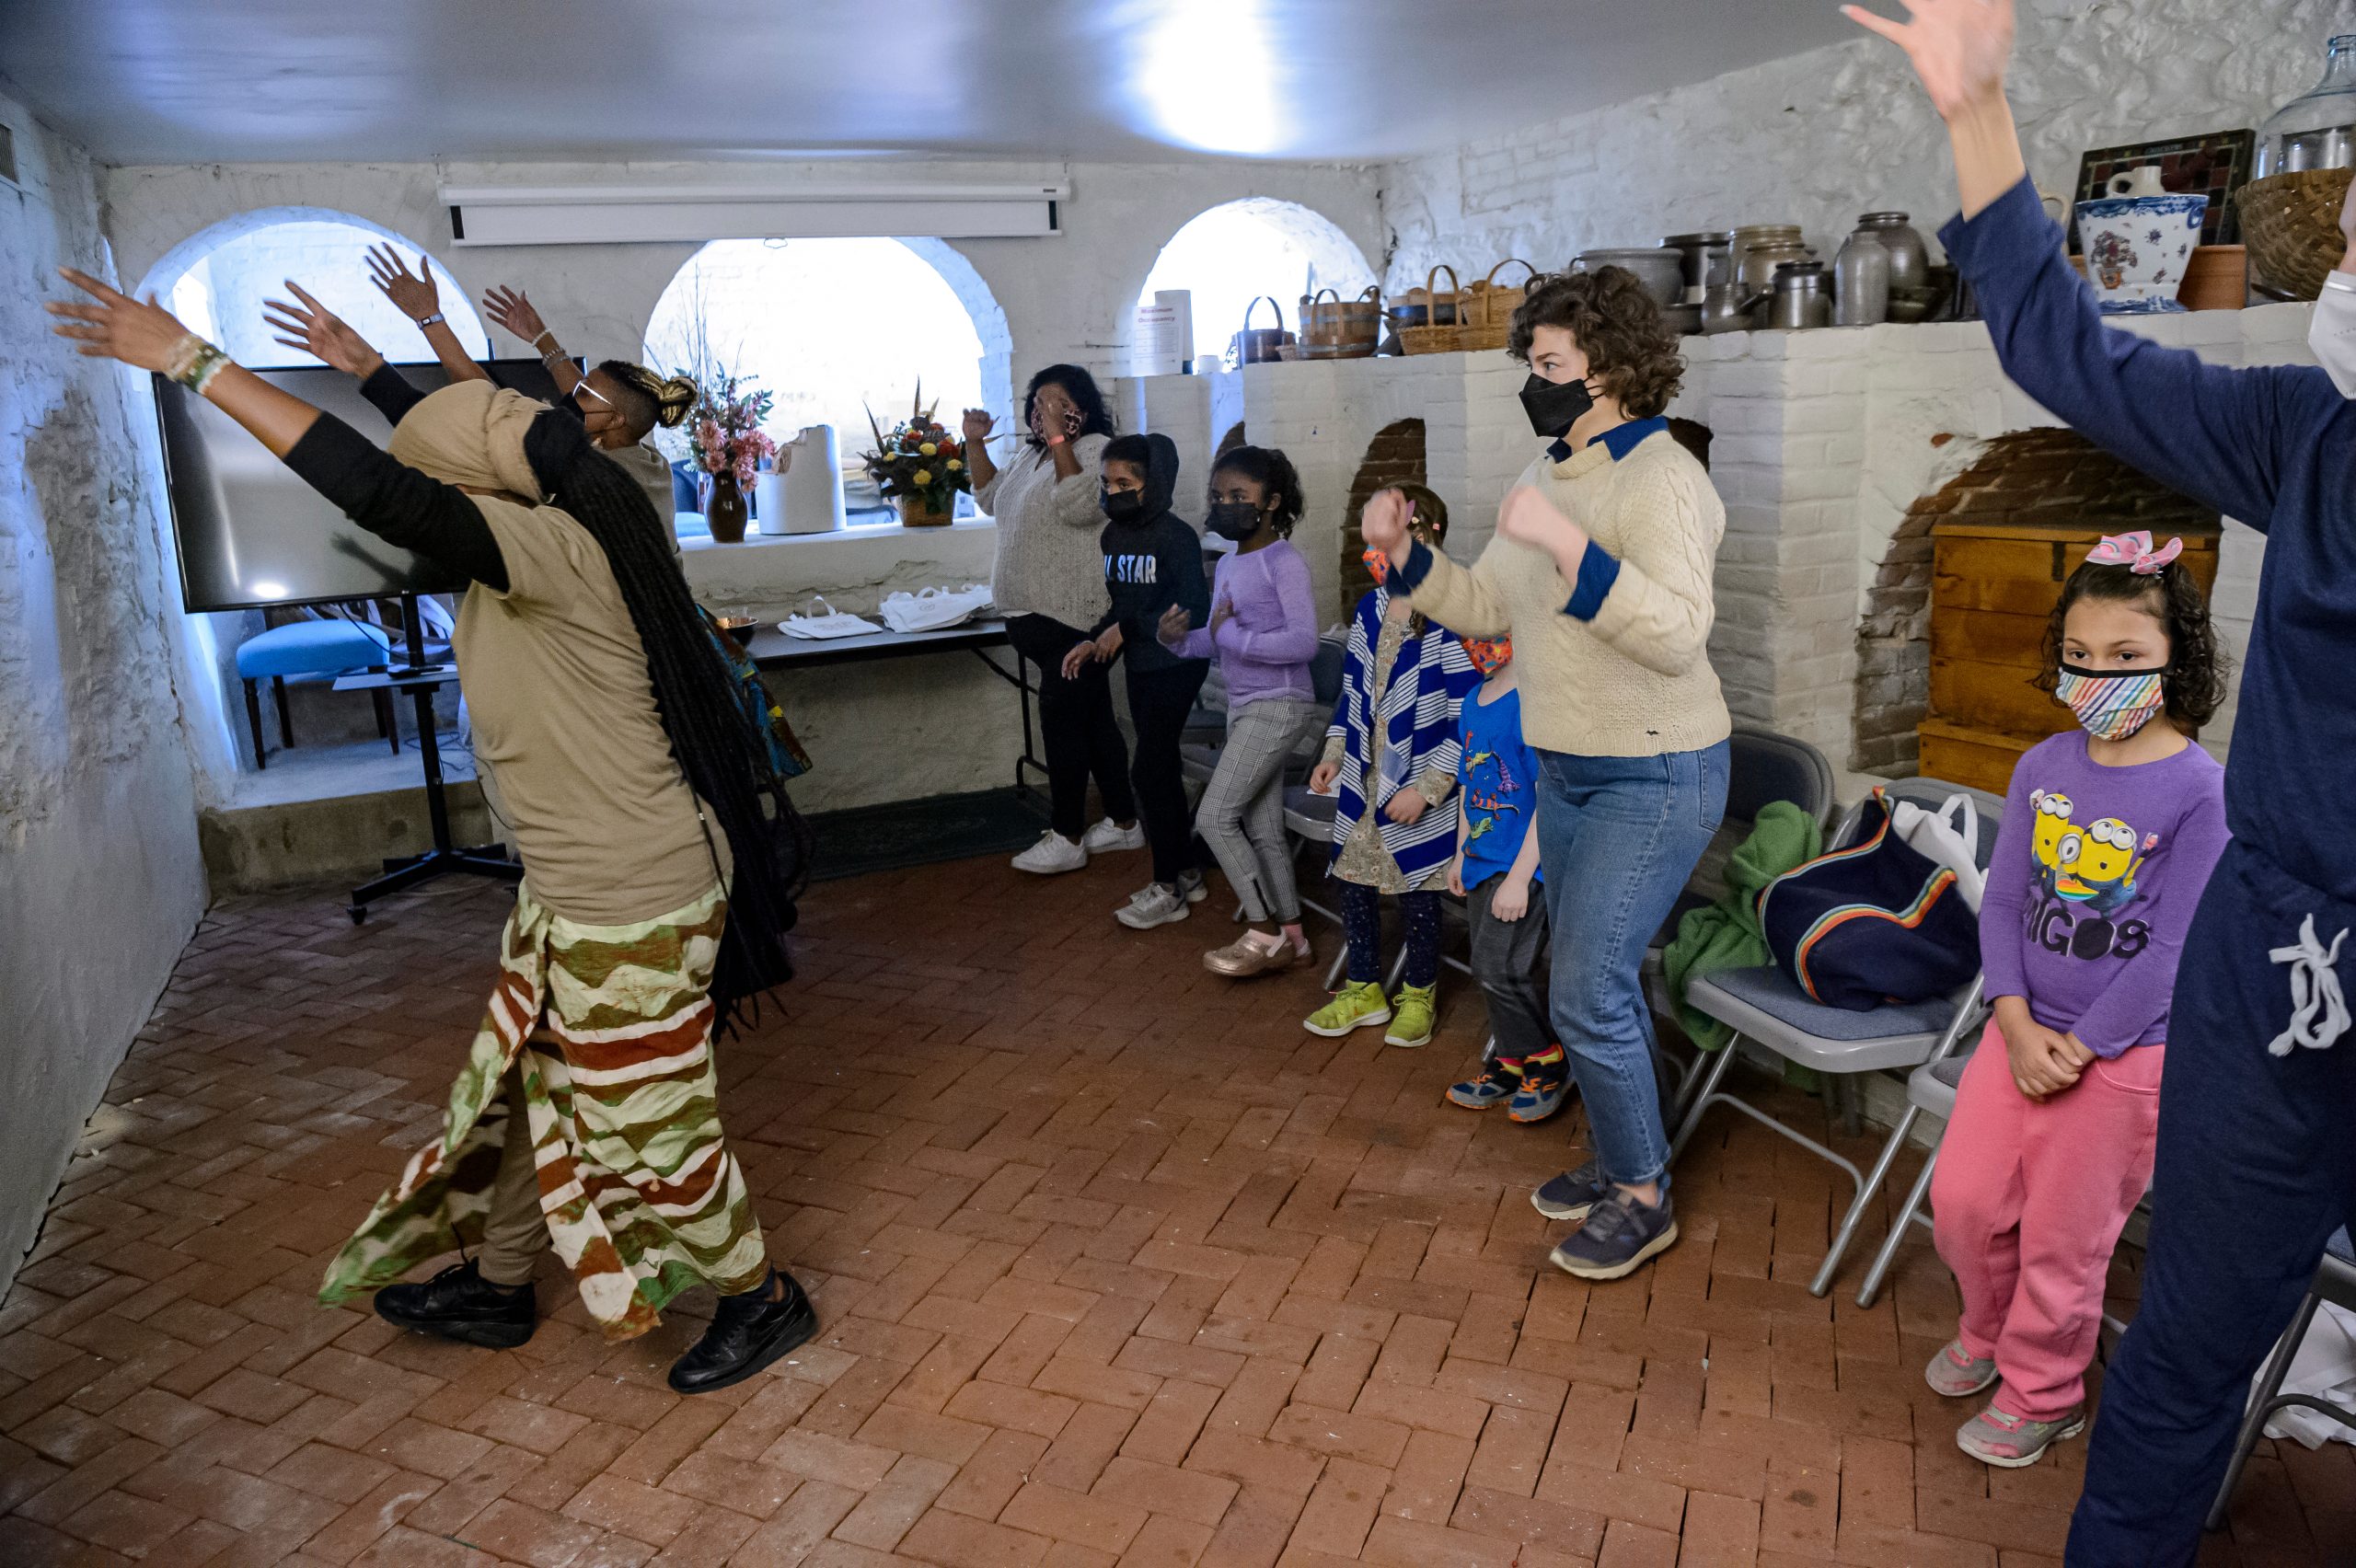 Children and adults dance in Homewood's Wine Cellar.